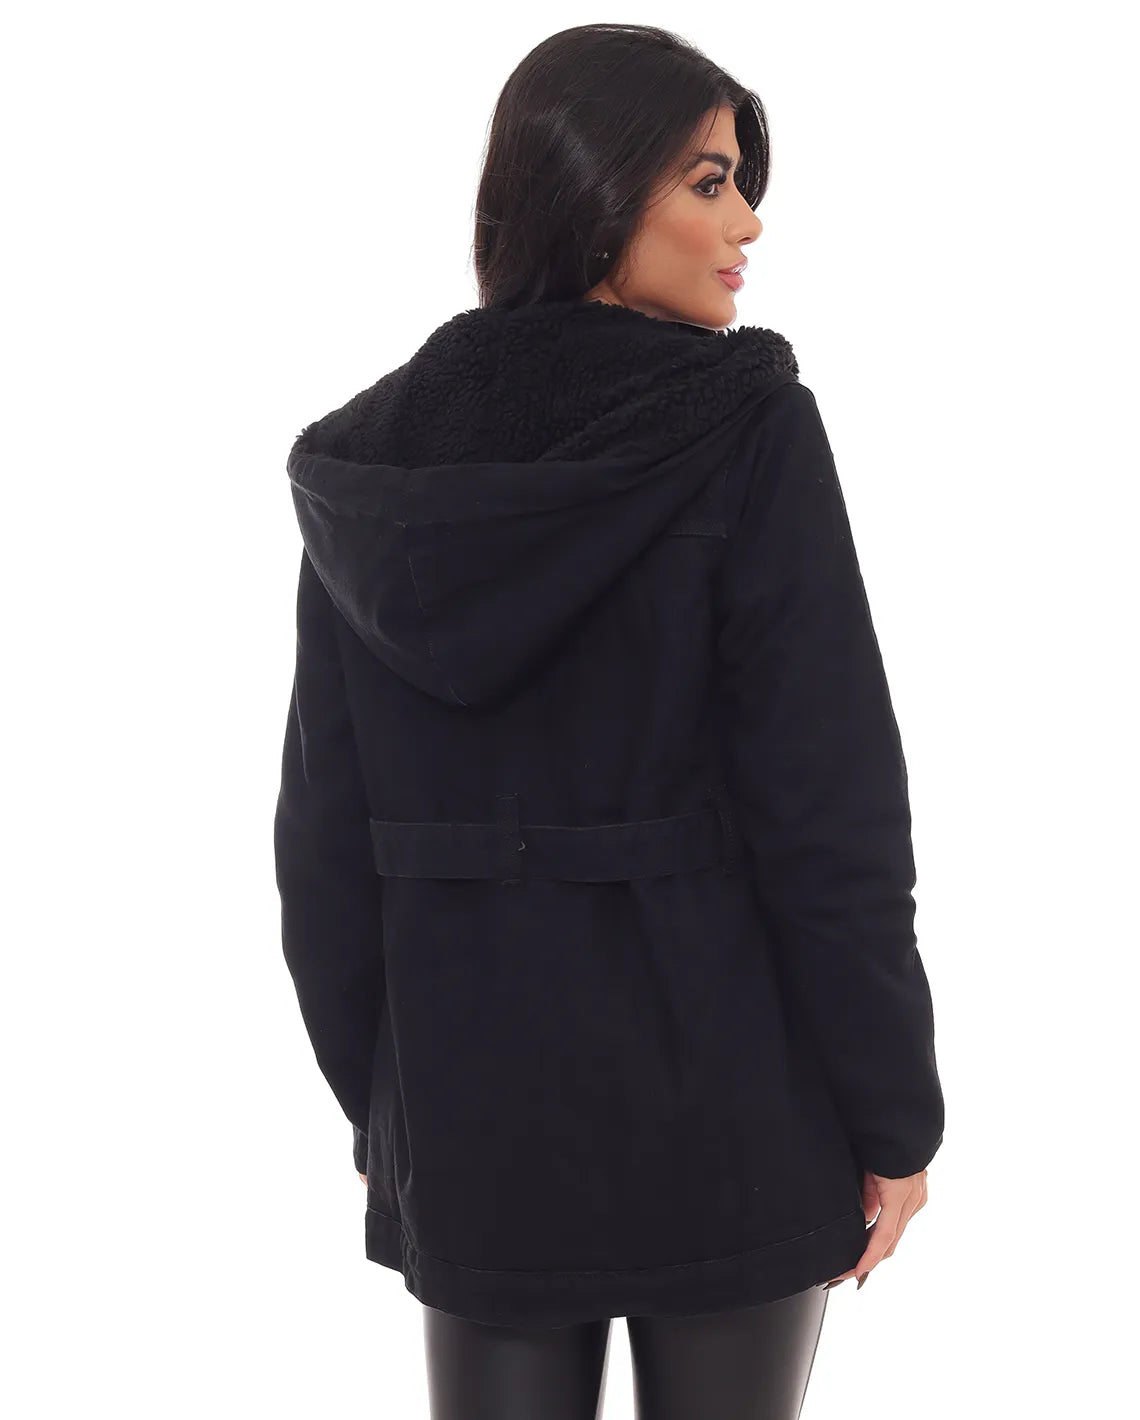 Women's Twill Parka Lined with Hood 22626 Black